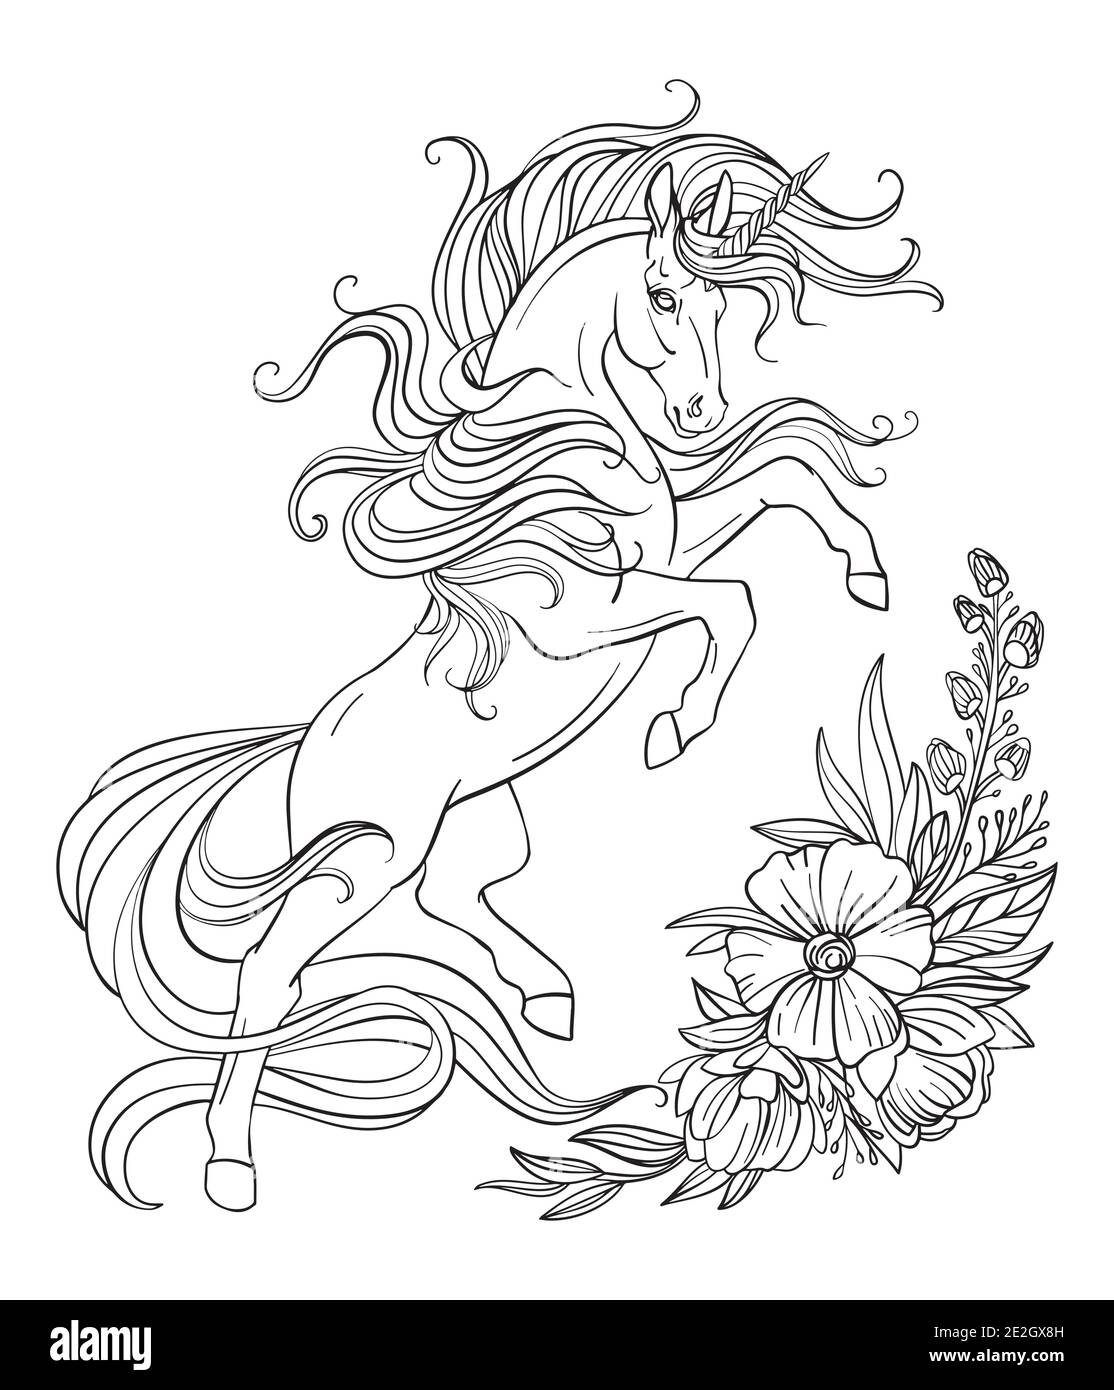 Drawing isolated reared unicorn with long mane and flowers tangle style for adult coloring book tattoo t